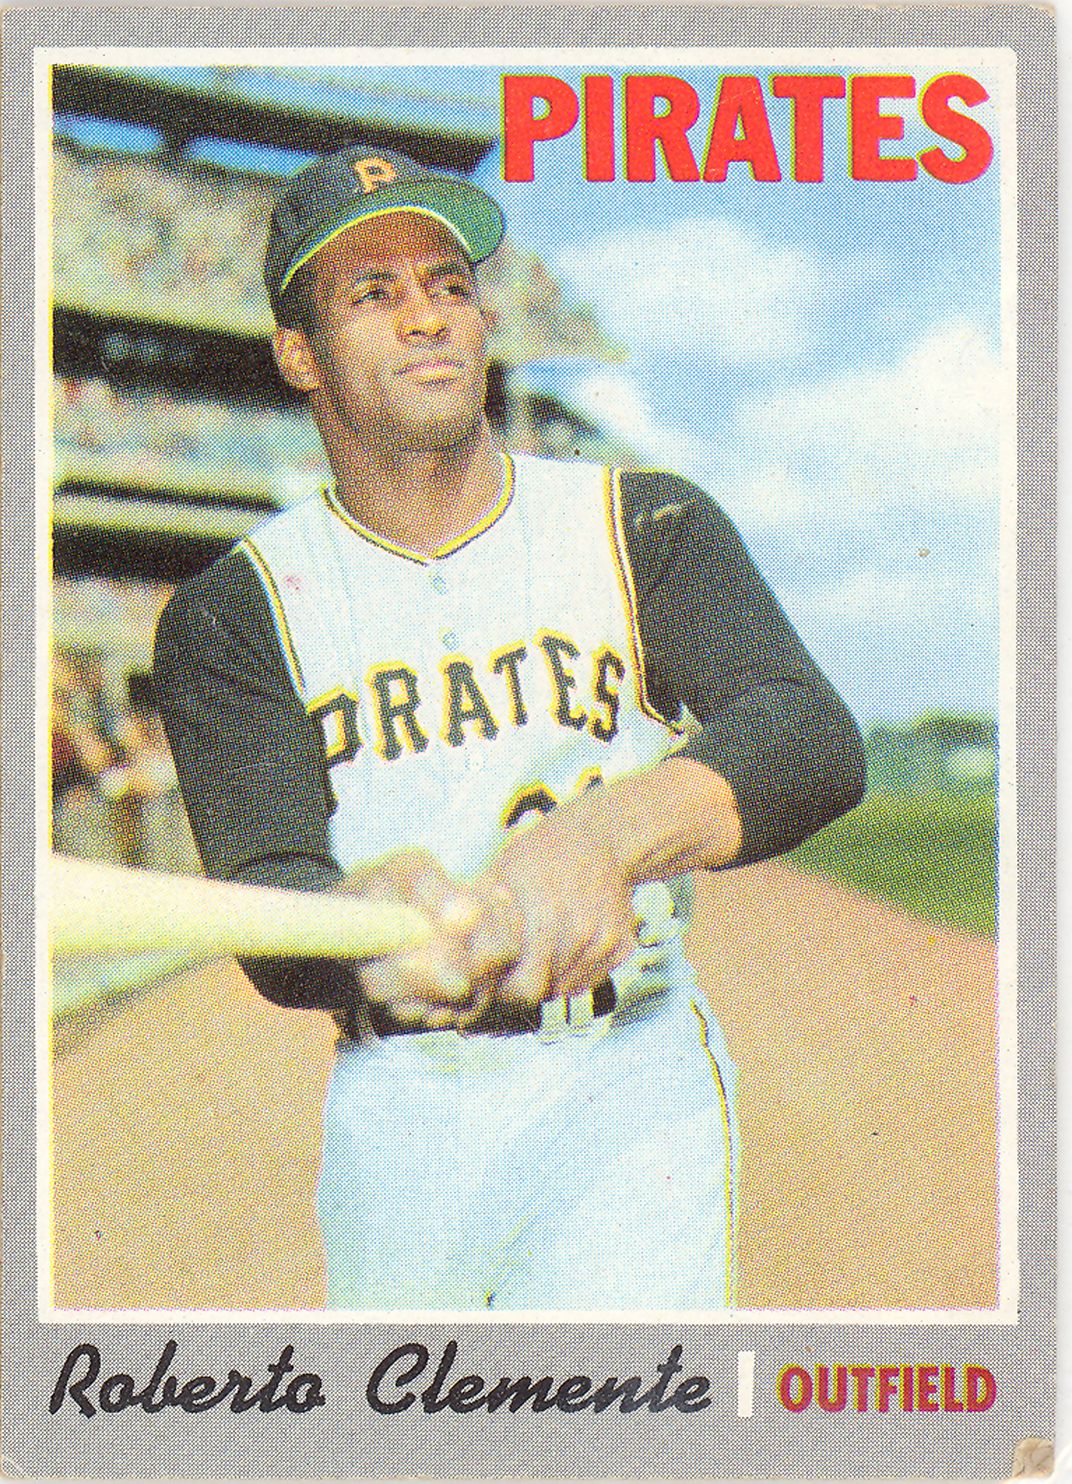 Sports card featuring baseball player Roberto Clemente wearing his Pirates team uniform, holding a baseball bat, and standing in a baseball field.